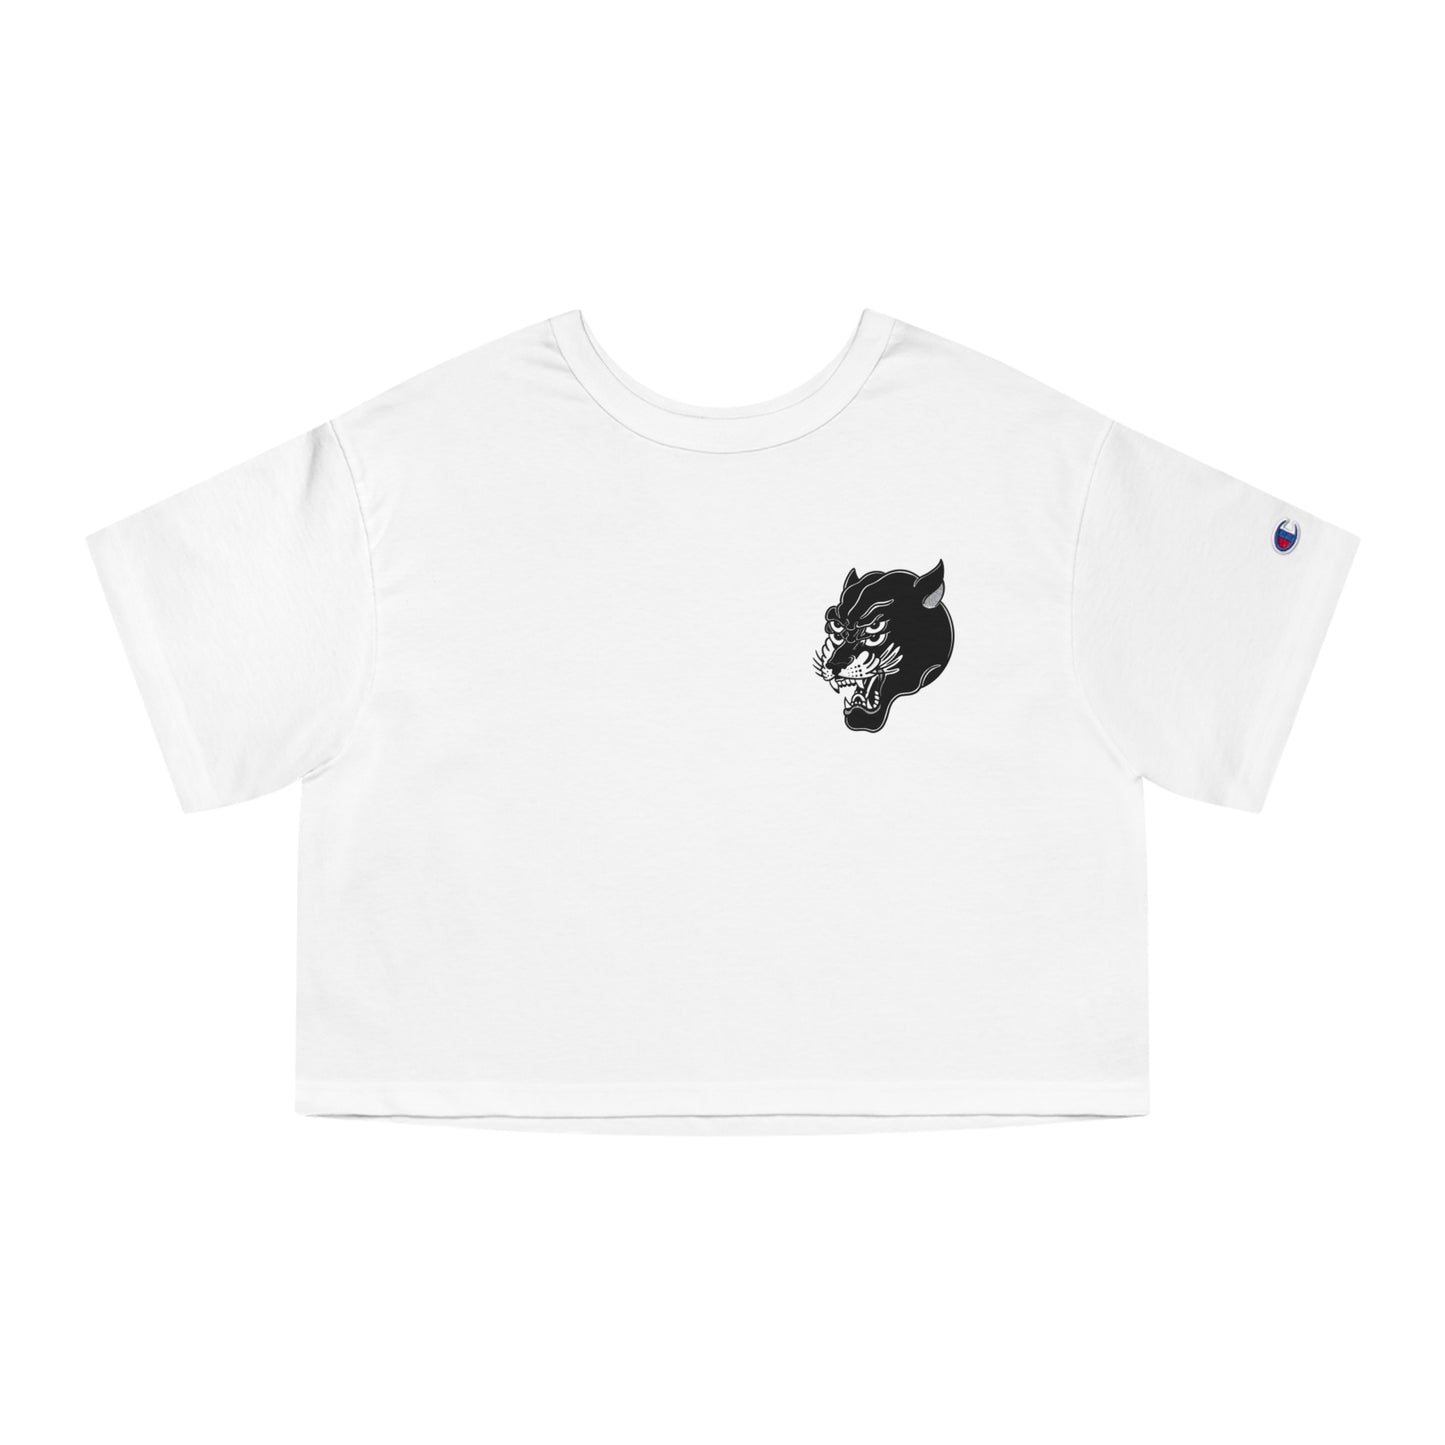 Champion Heritage Crop Top Tee | Gypsy's Double Gypsy Lady (by @ohbhave)